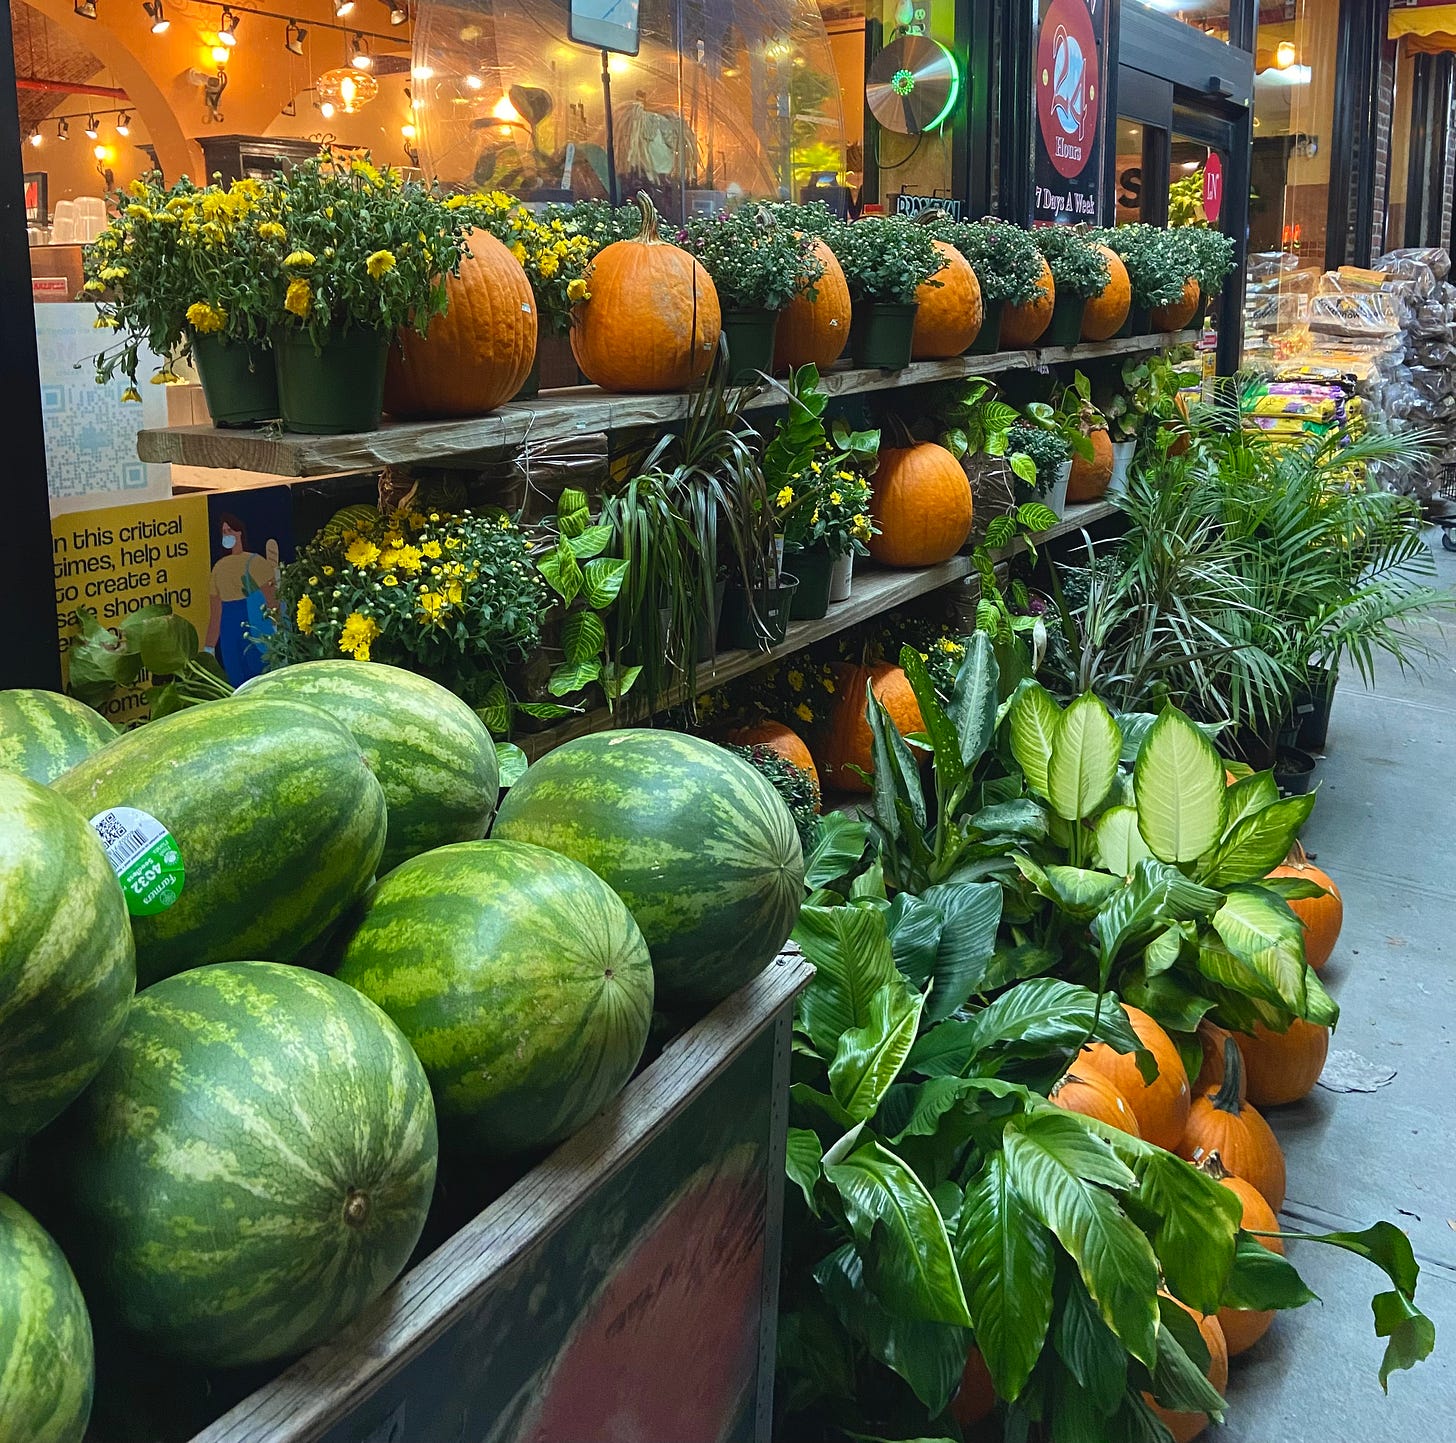 a bin of watermelons next to a display of pumpkins